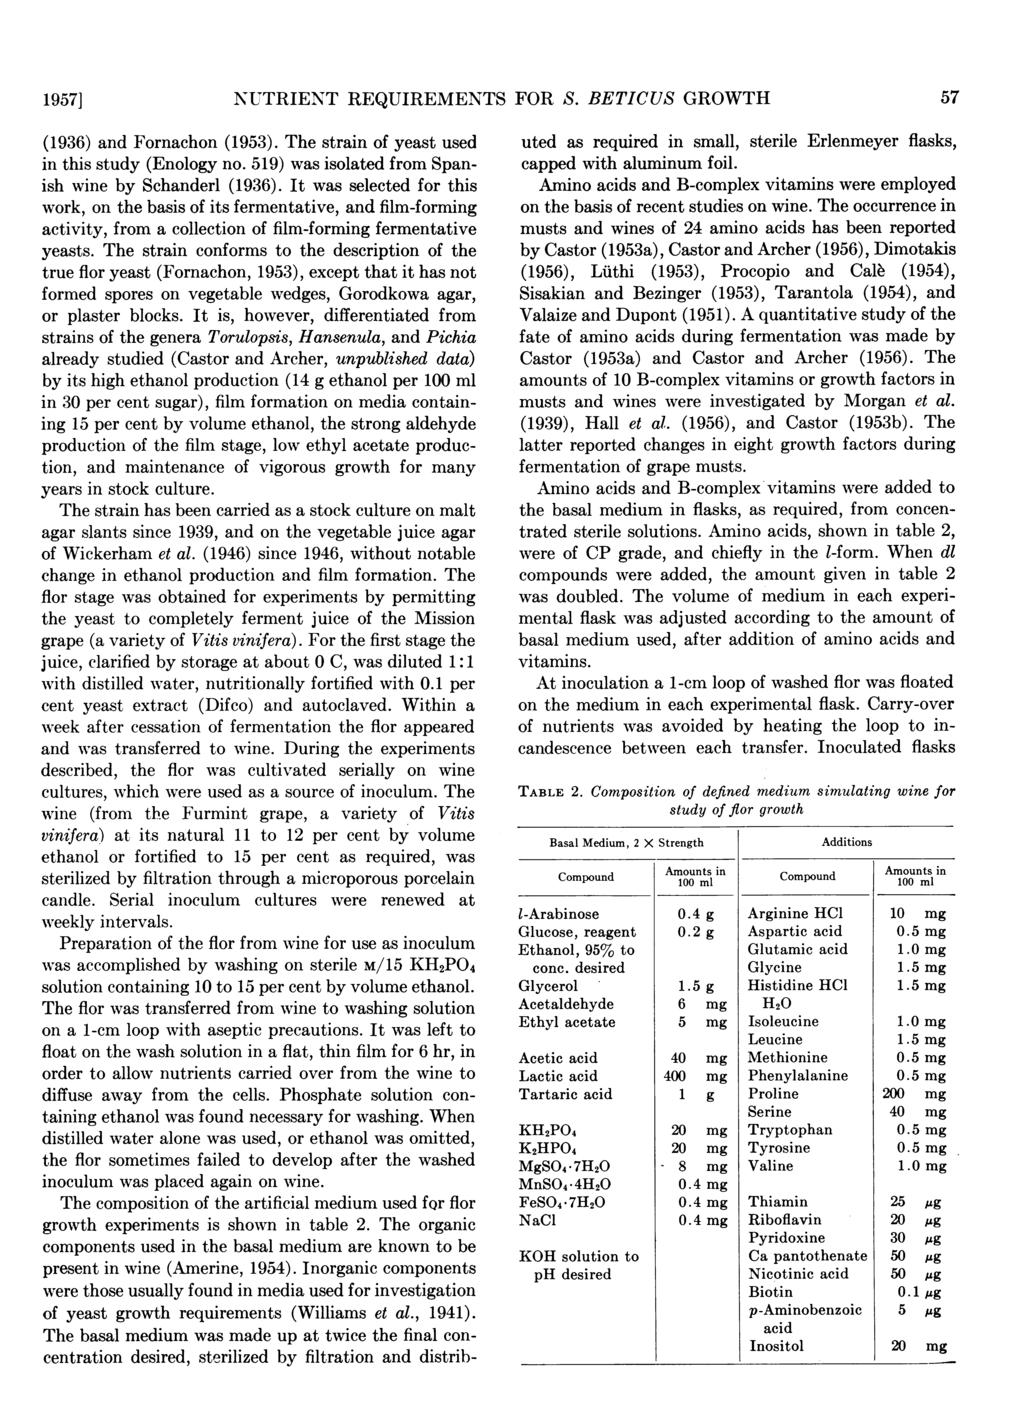 1957] 1NUTRIENT REQUIREMENTS FOR S. BETICUS GROWTH (1936) and Fornachon (1953). The strain of yeast used in this study (Enology no. 519) was isolated from Spanish wine by Schanderl (1936).